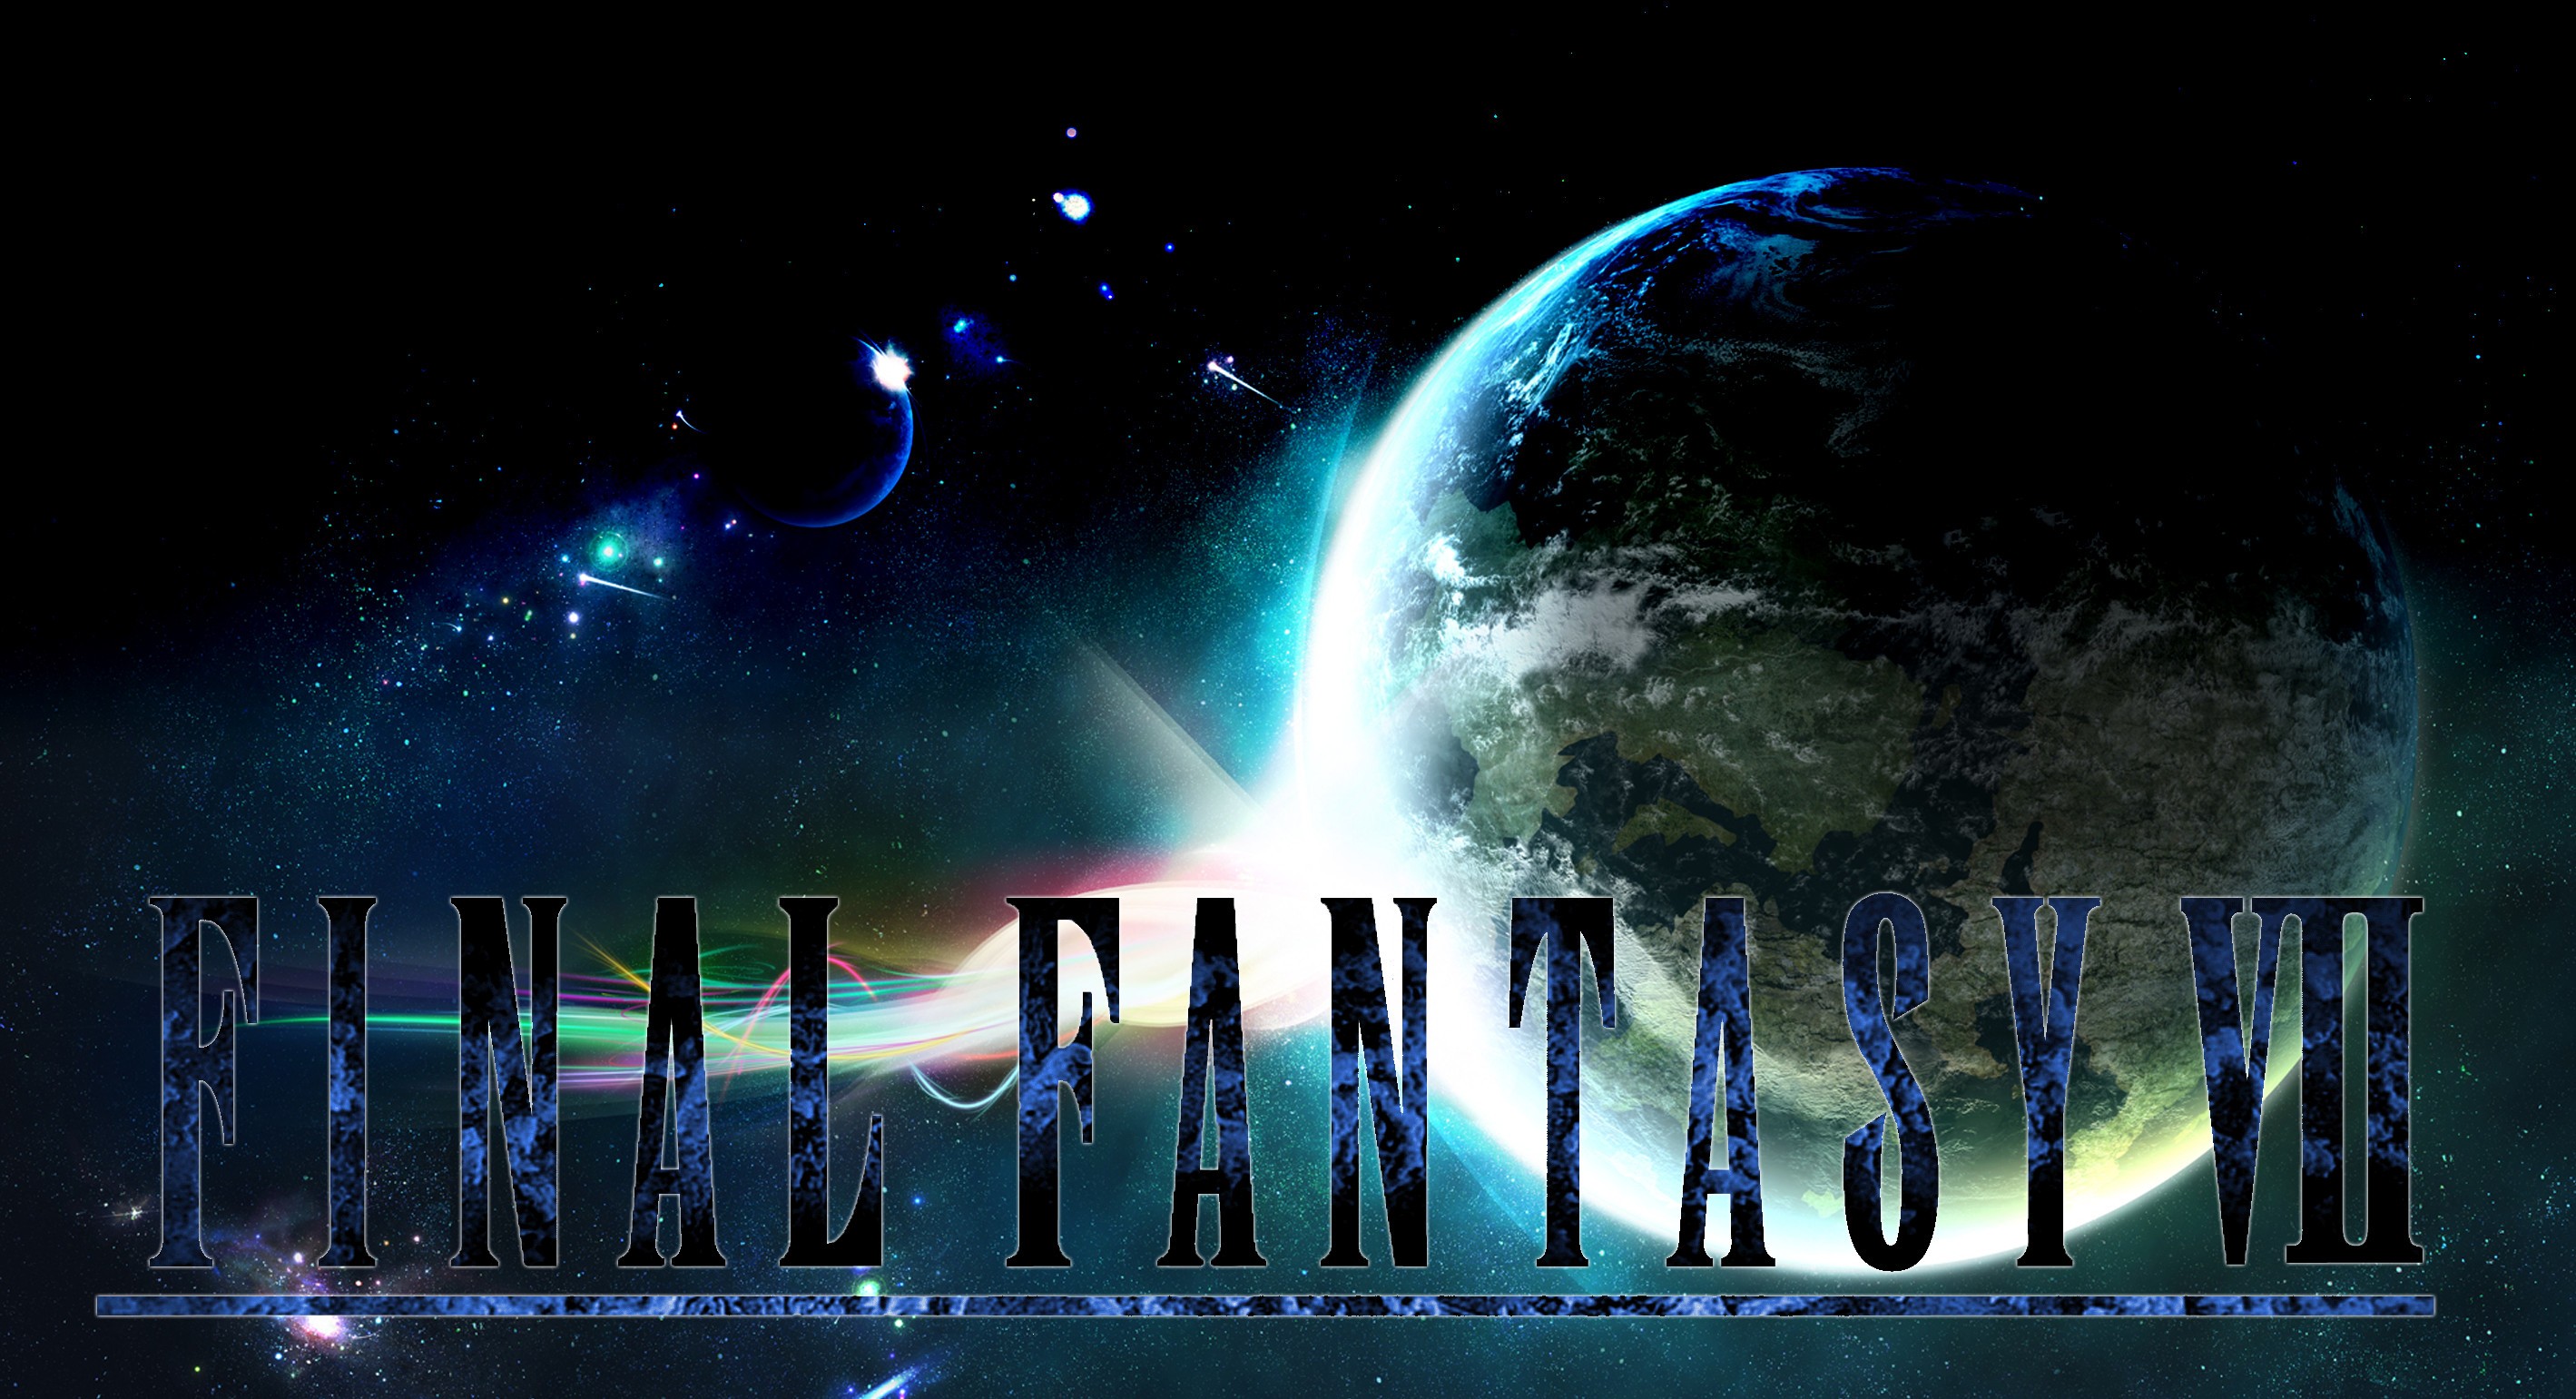  Final  Fantasy  VII wallpaper    Download free awesome full 